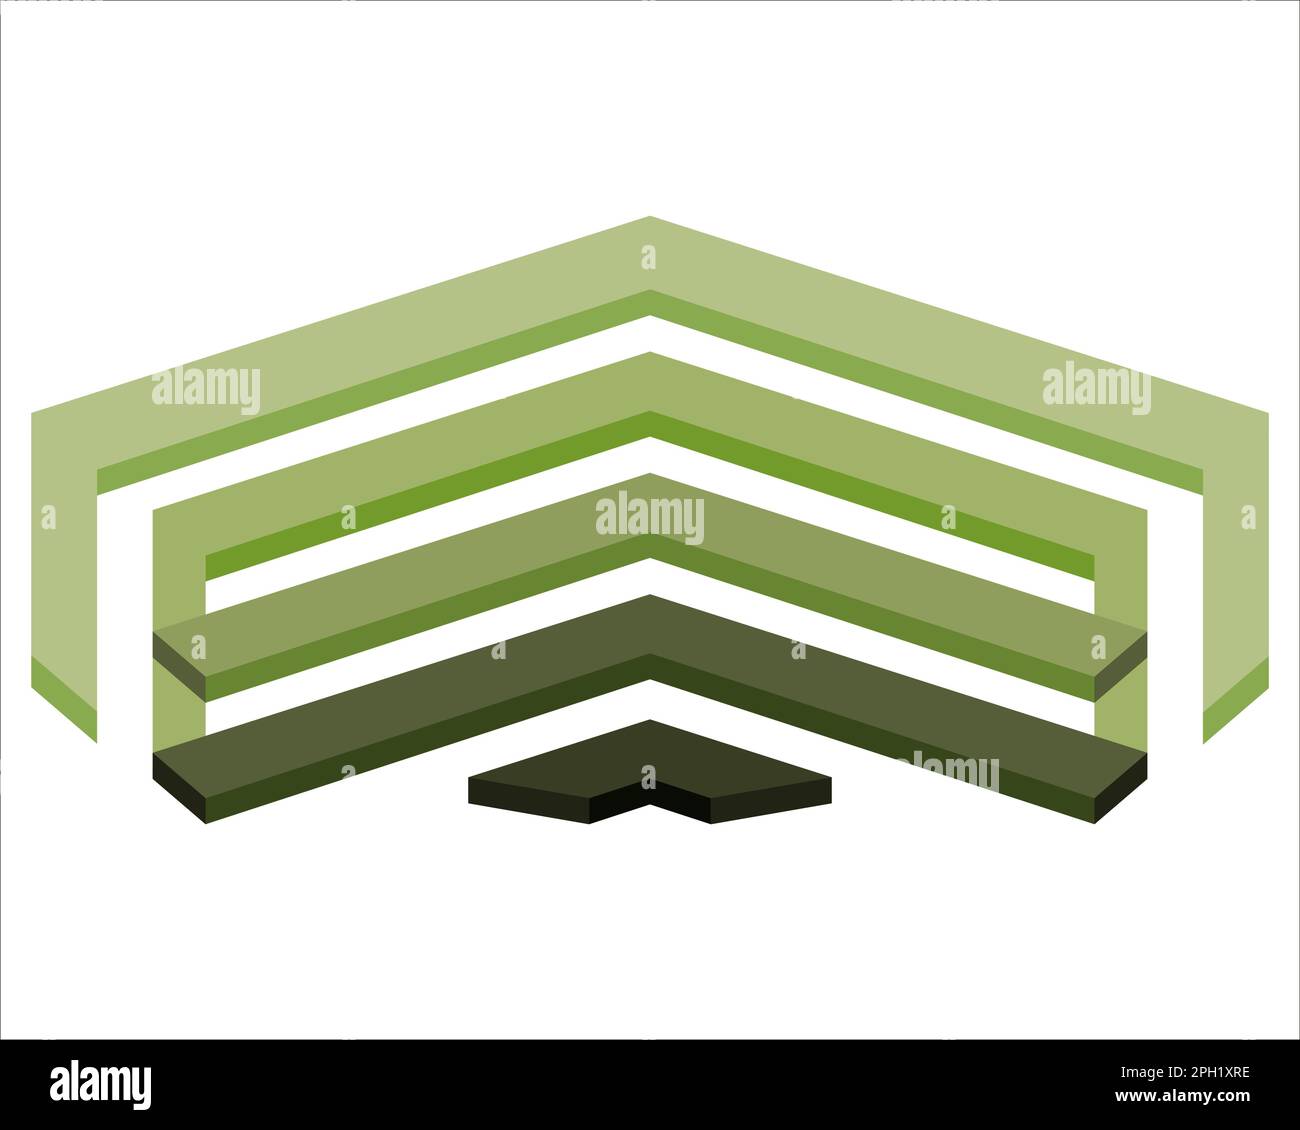 Green military ranks on chevron. Army soldier shoulder stripes. Colorful vector illustration isolated on white background. Stock Vector